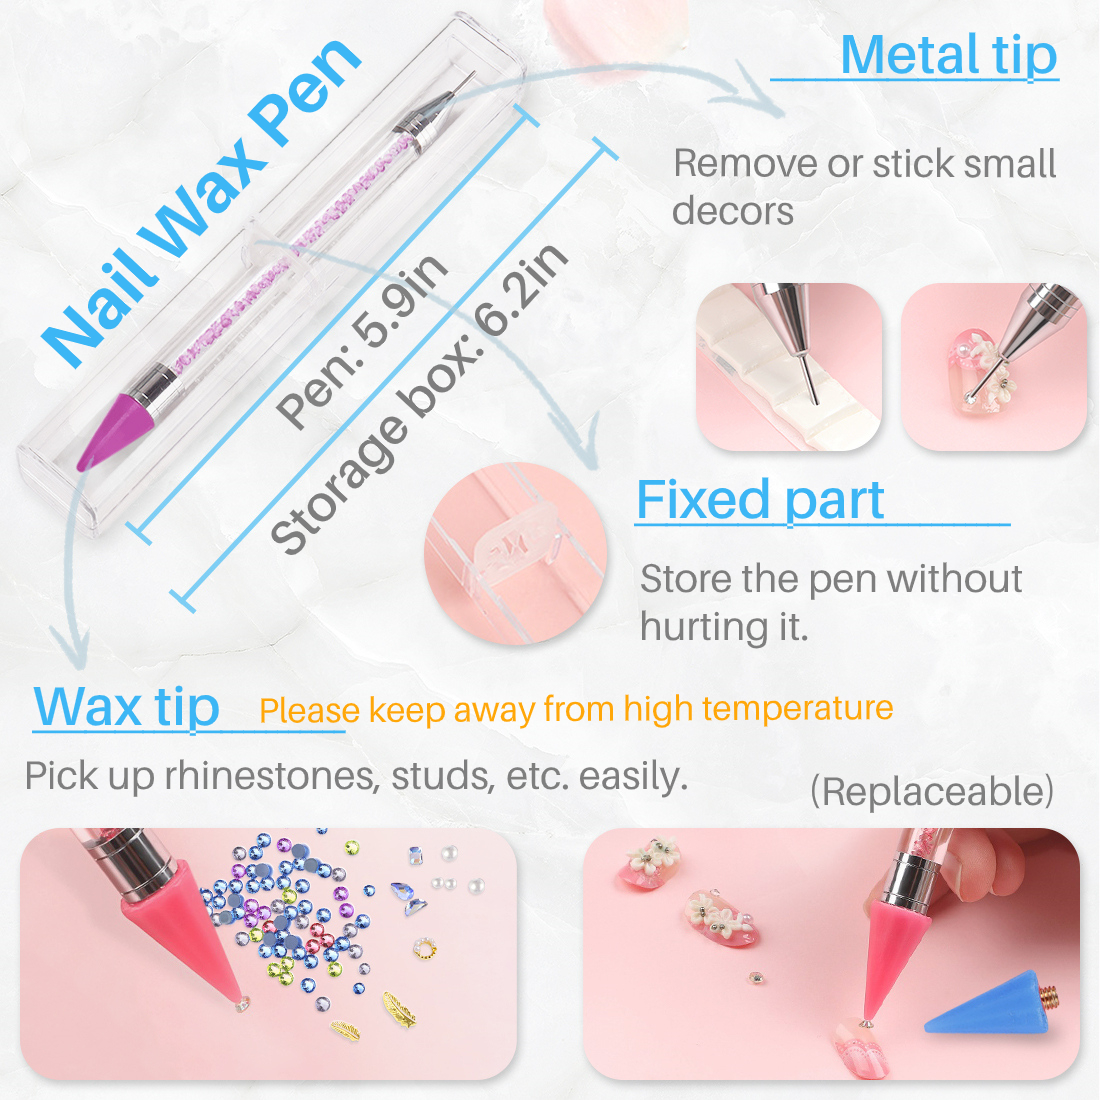 Nail Rhinestone Picker Dotting Tool, 3pcs Nail Art Brushes for Painting  with Different Size, Dual-ended Wax Pen DIY Nail Art Tool With Pink Acrylic